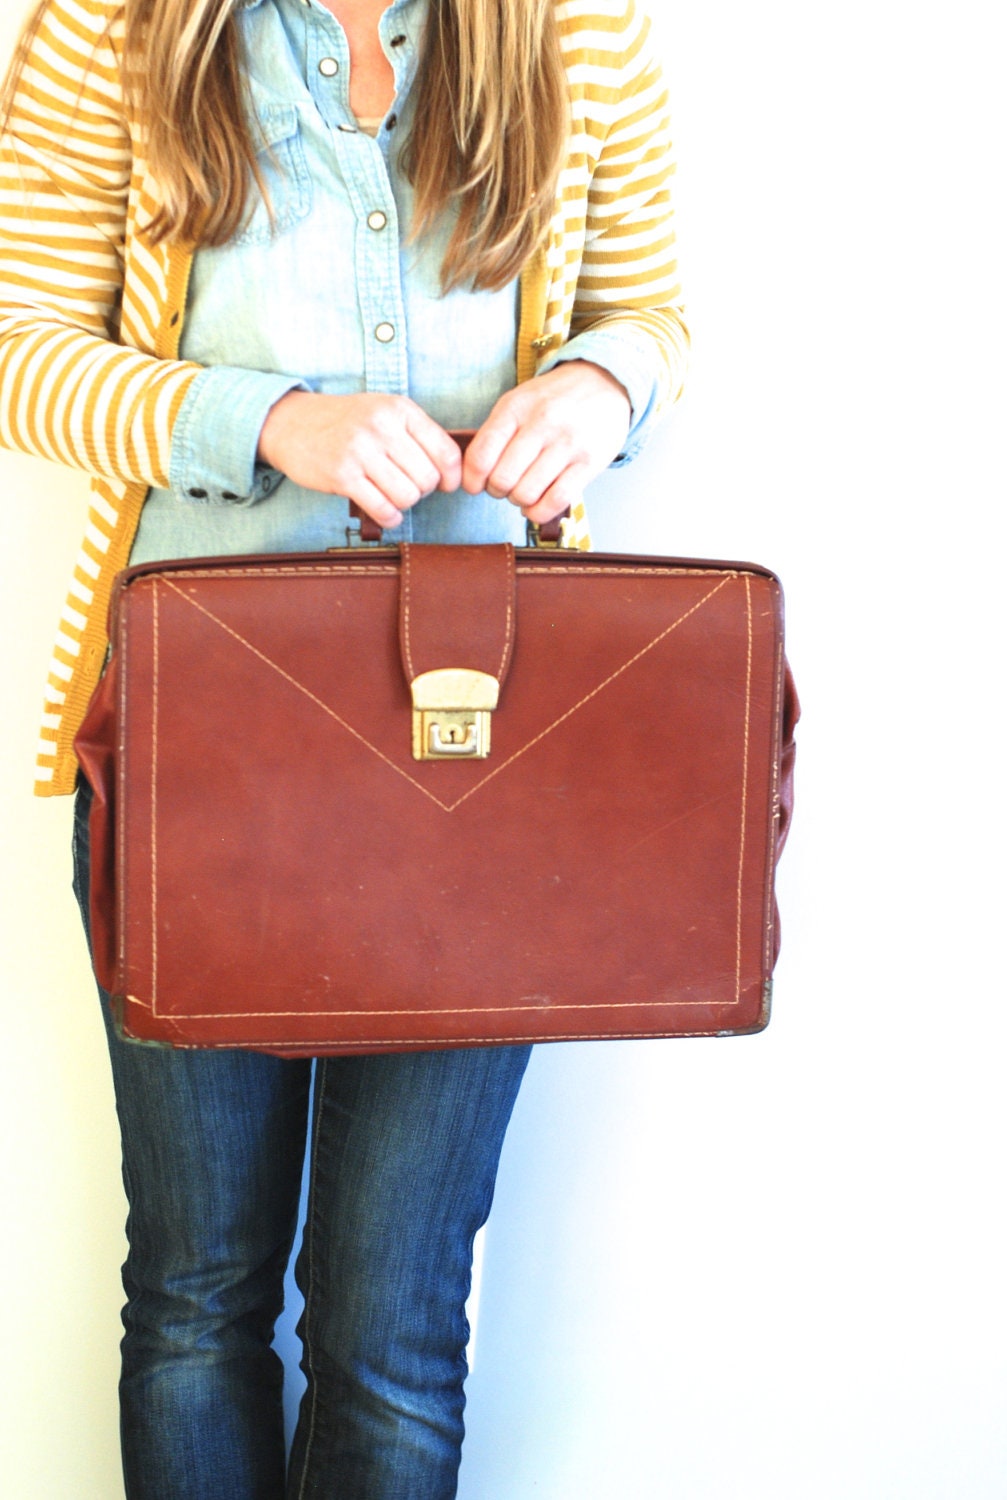 Vintage Briefcase - thevintagetreehouse